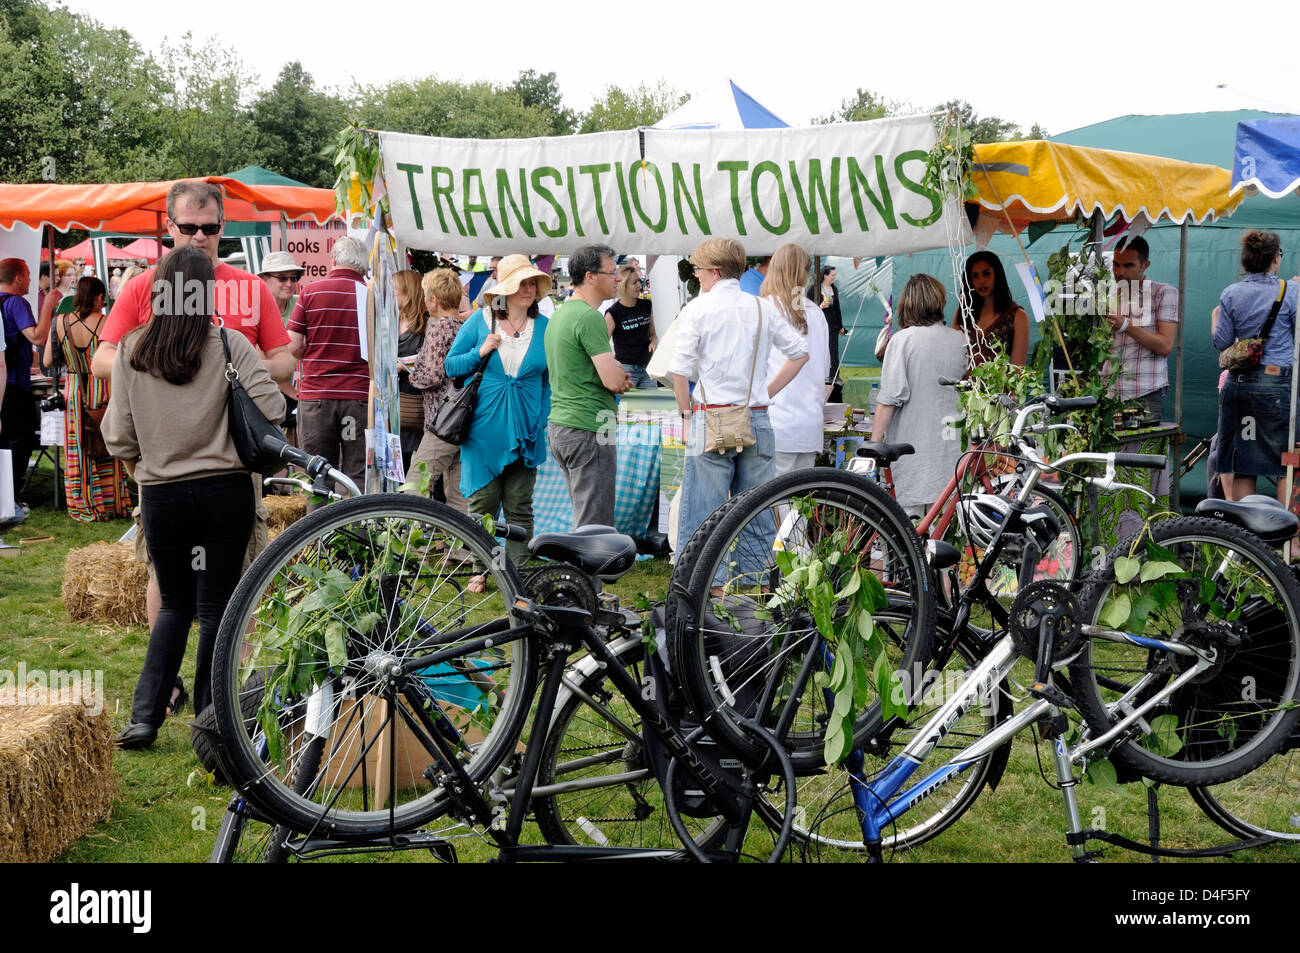 Transition Towns or town stall surrounded by people with upsidedown bicycles in front, Camden now London Green Fair England UK Stock Photo